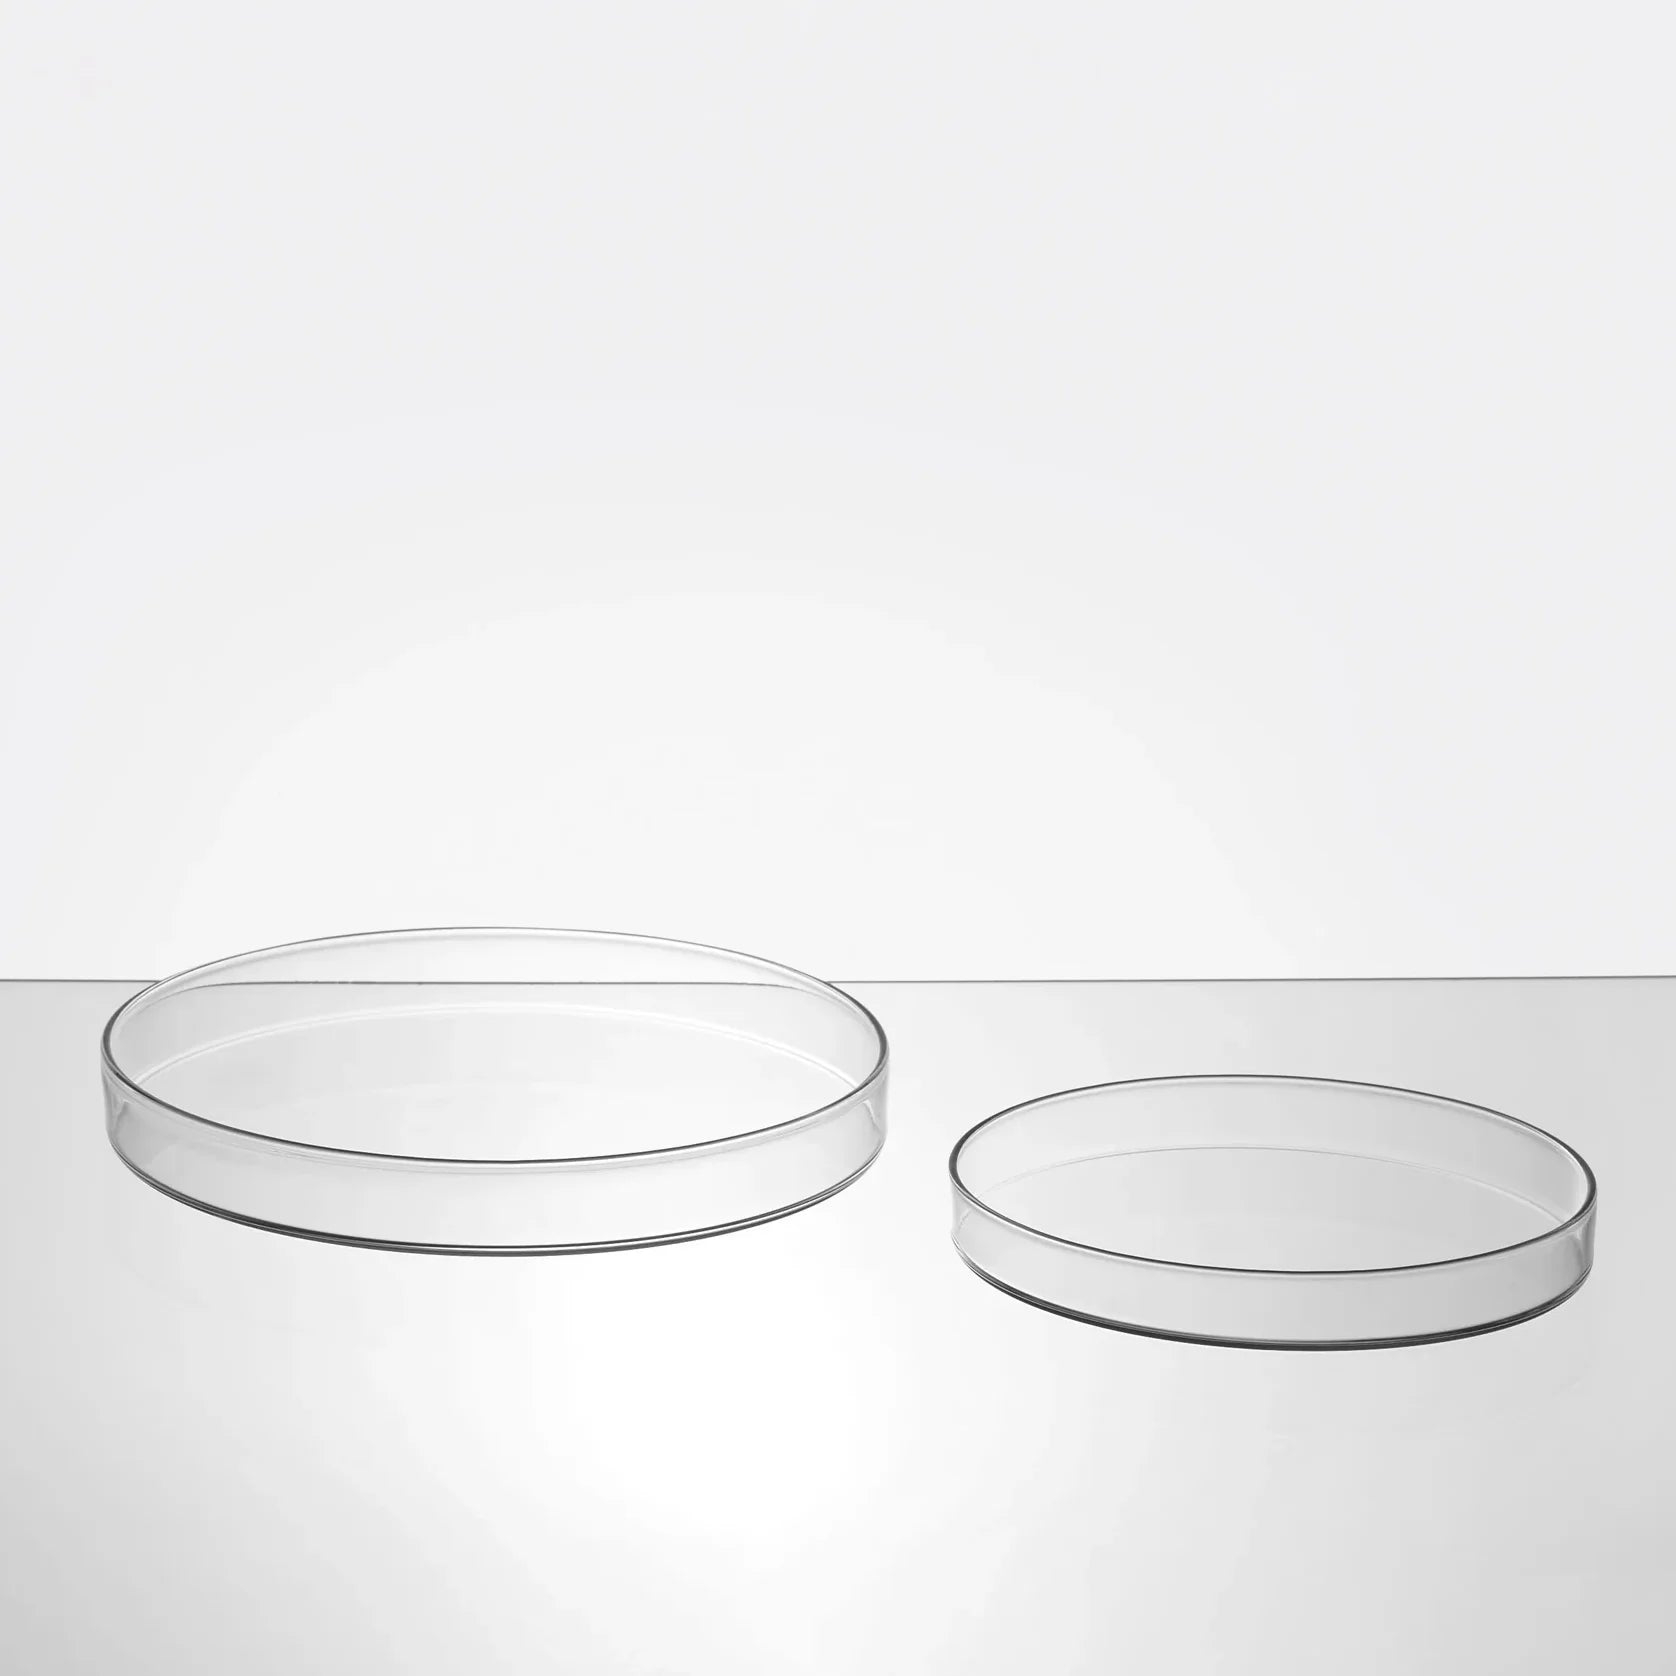 Dotto, flat plate in glass 